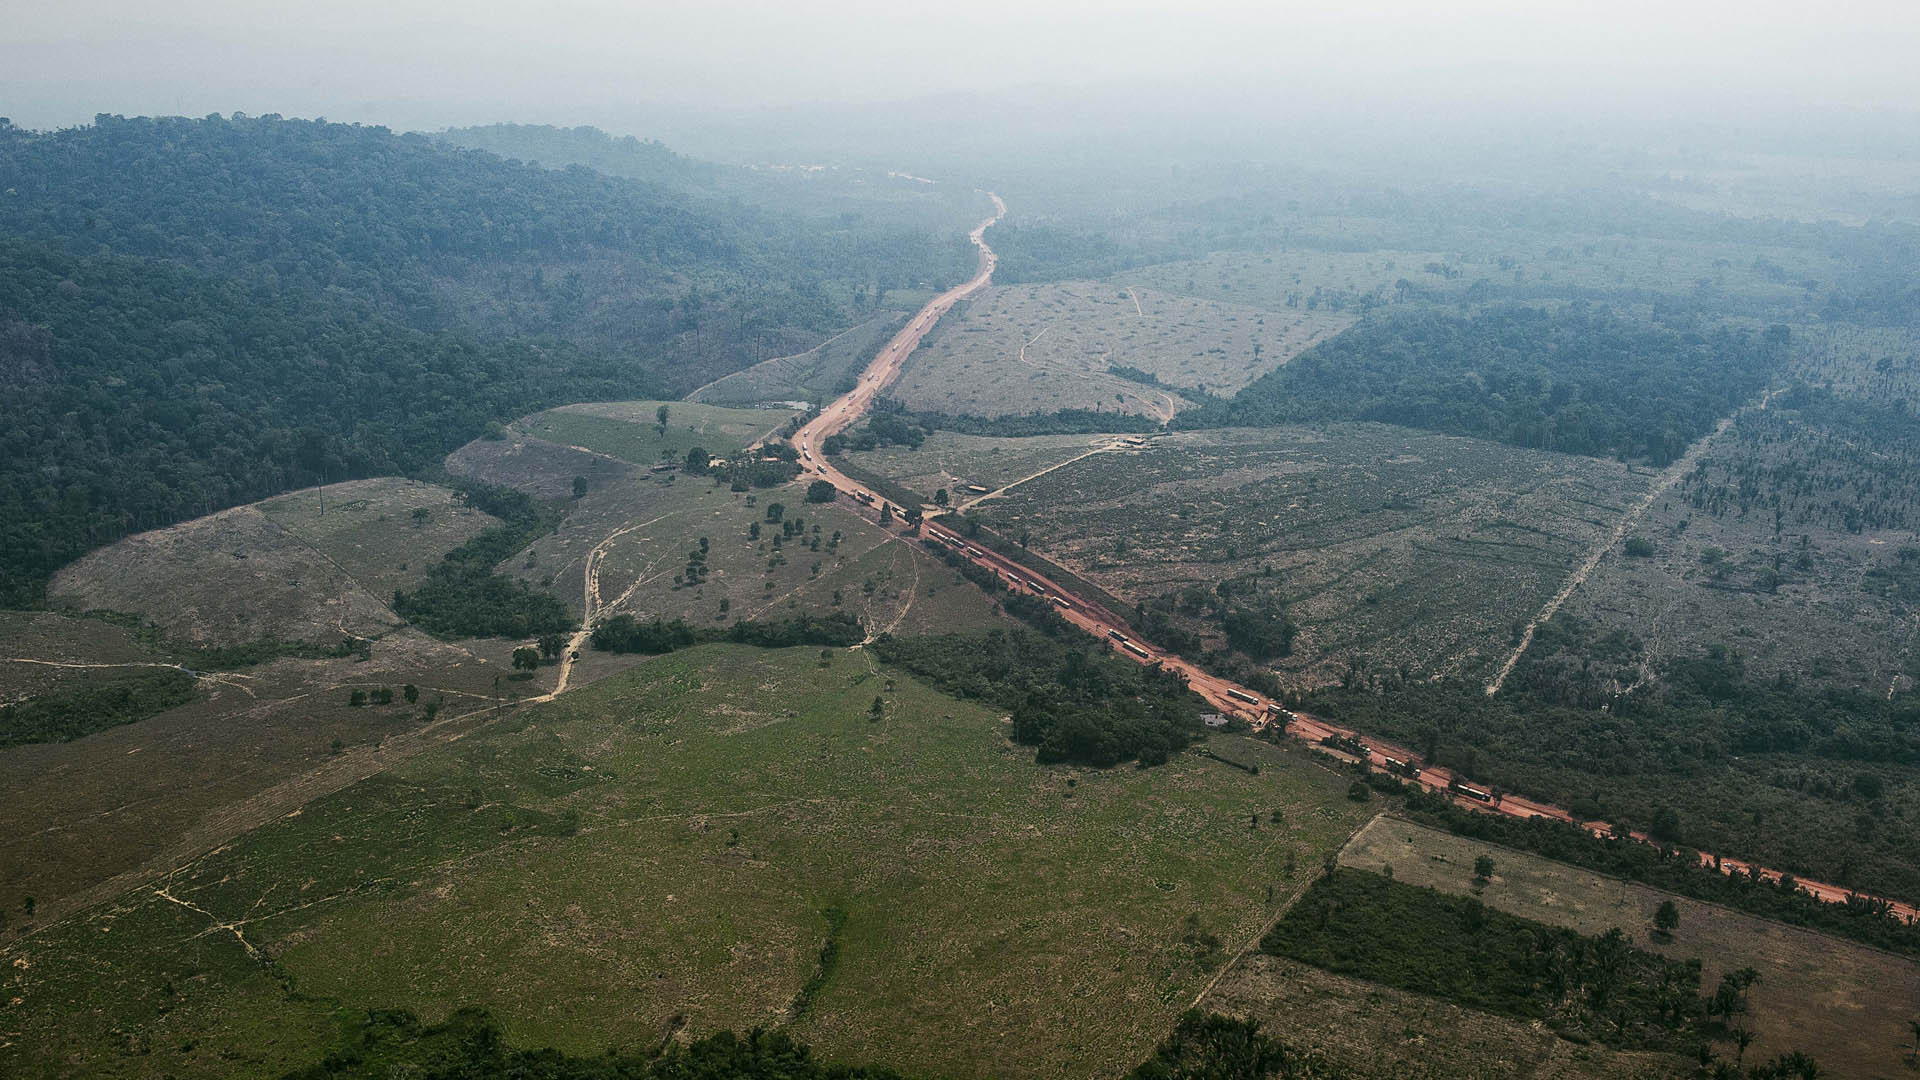 Brazil's plans to pave an  road could open path to more deforestation  : NPR